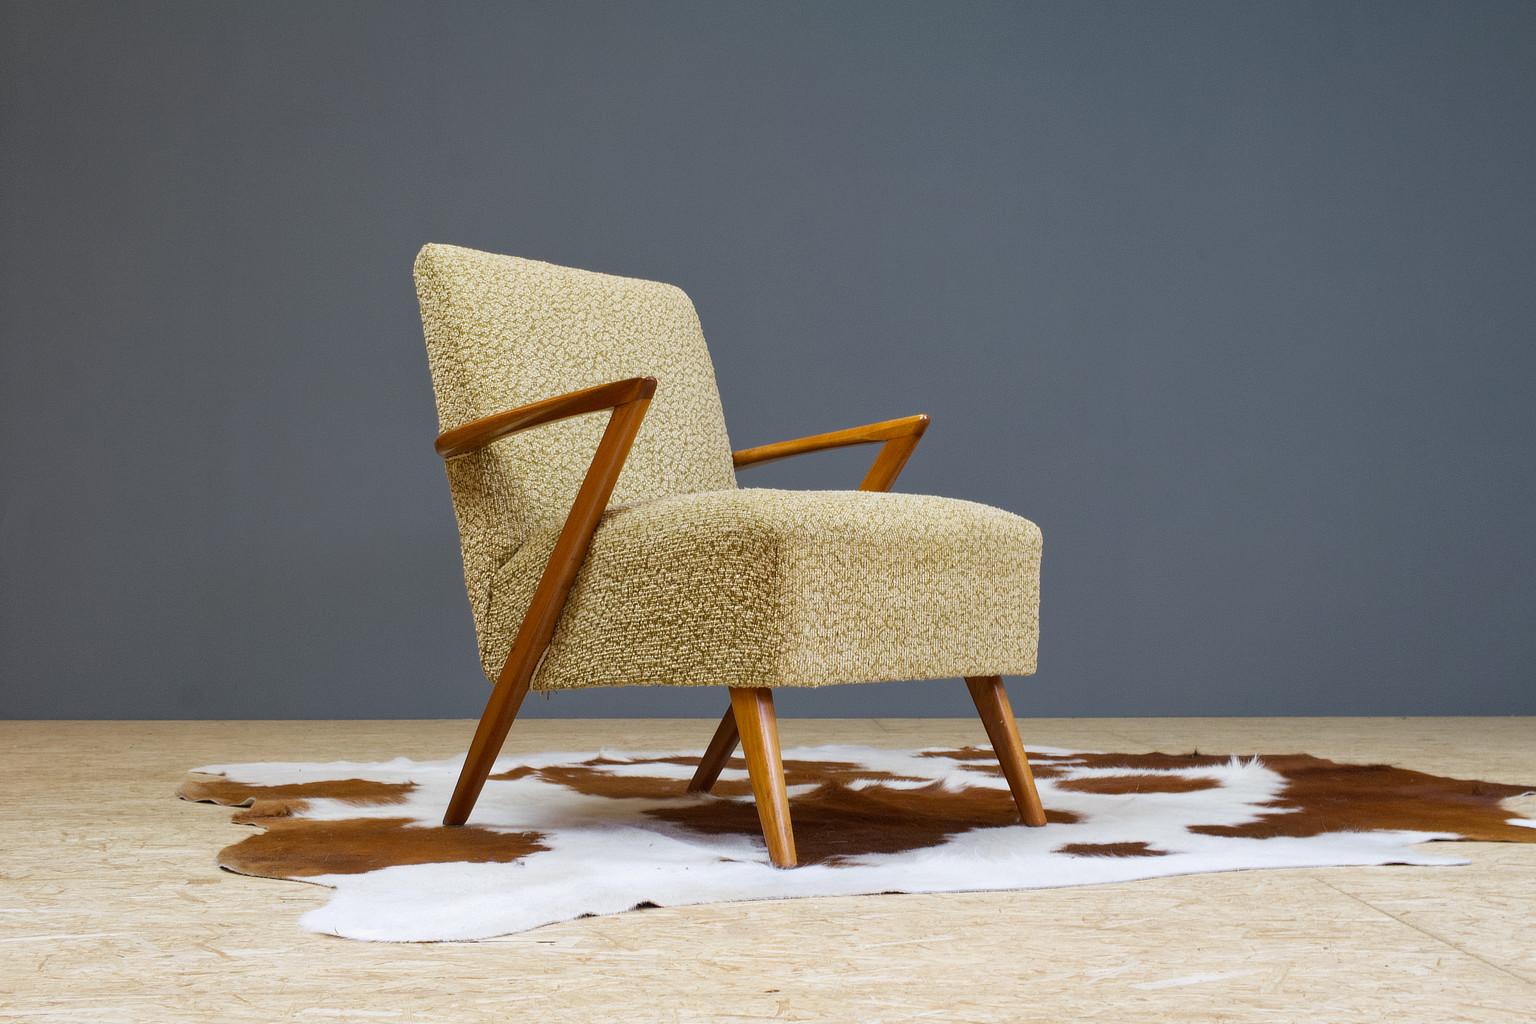 Modest yet with the sculptural armrest a very striking design. You'll see architectural threats of Kurt Olsen in this design, yet designer unknown. Original vintage Scandinavian Modern lounge chair in elm. Great sculptural angle in the elm wooden